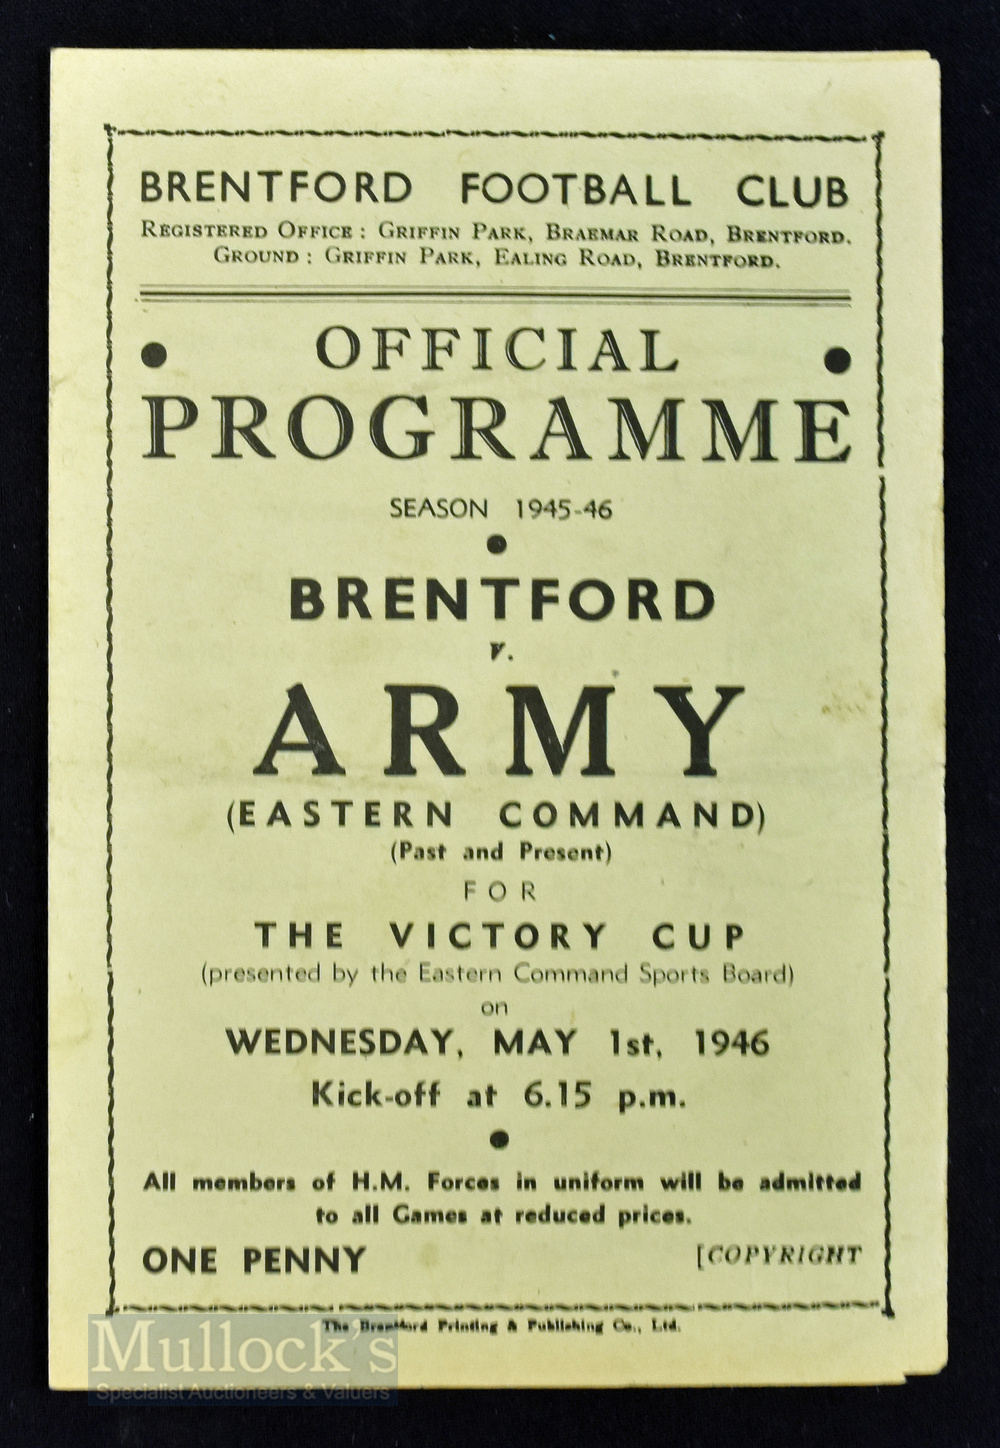 War time friendly 1945/46 Brentford v Army 4 page match programme for the Victory Cup 1st May